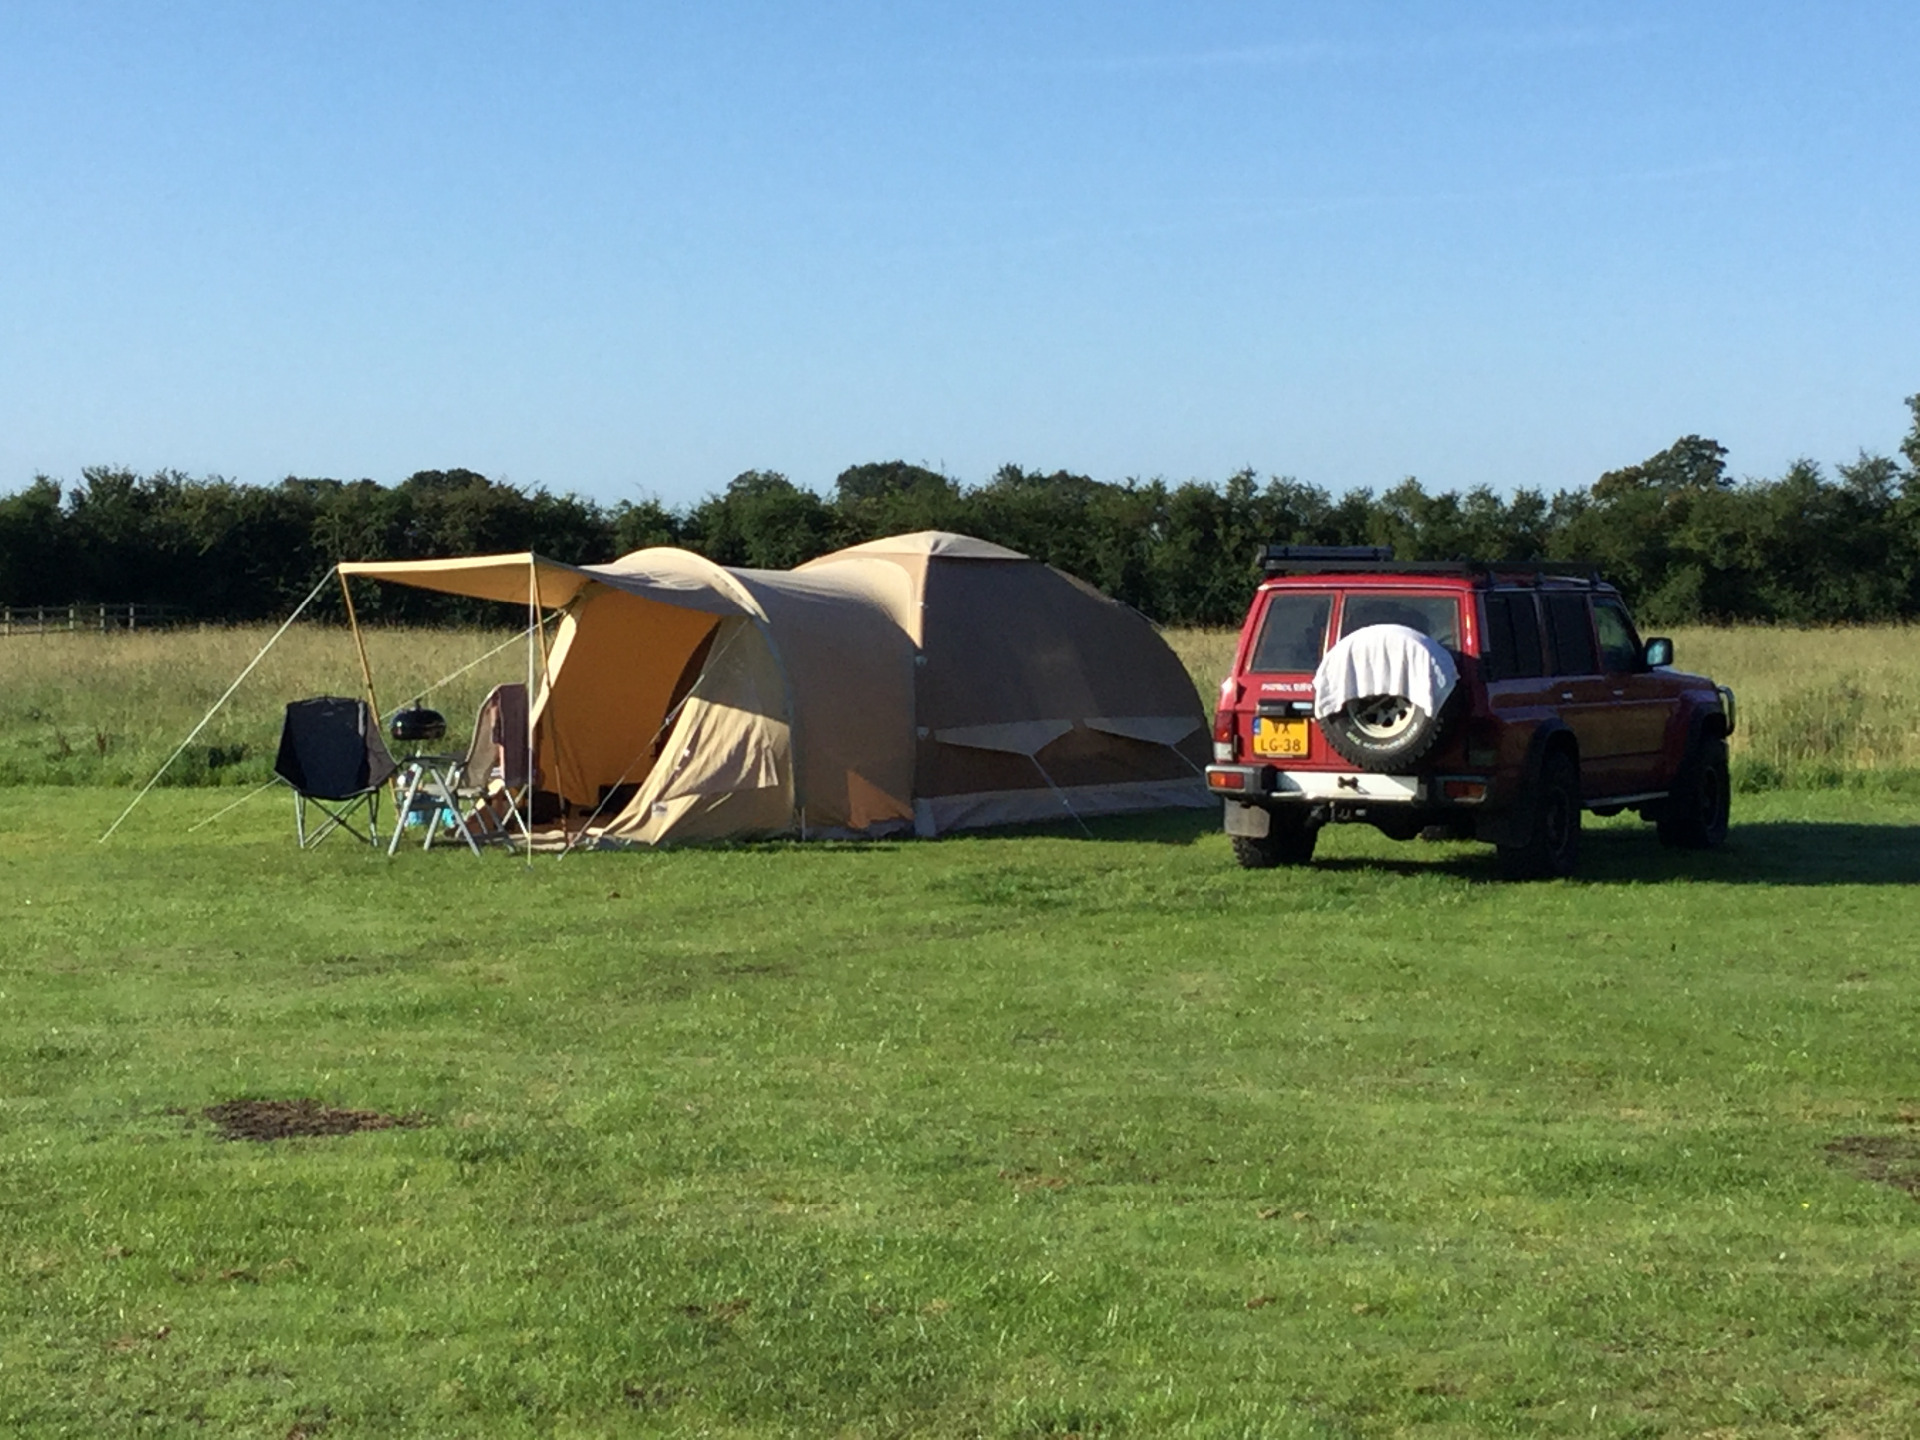 Beige tent with awning pitched next to a red 4x4 vehicle, on lush green grass and with blue sky